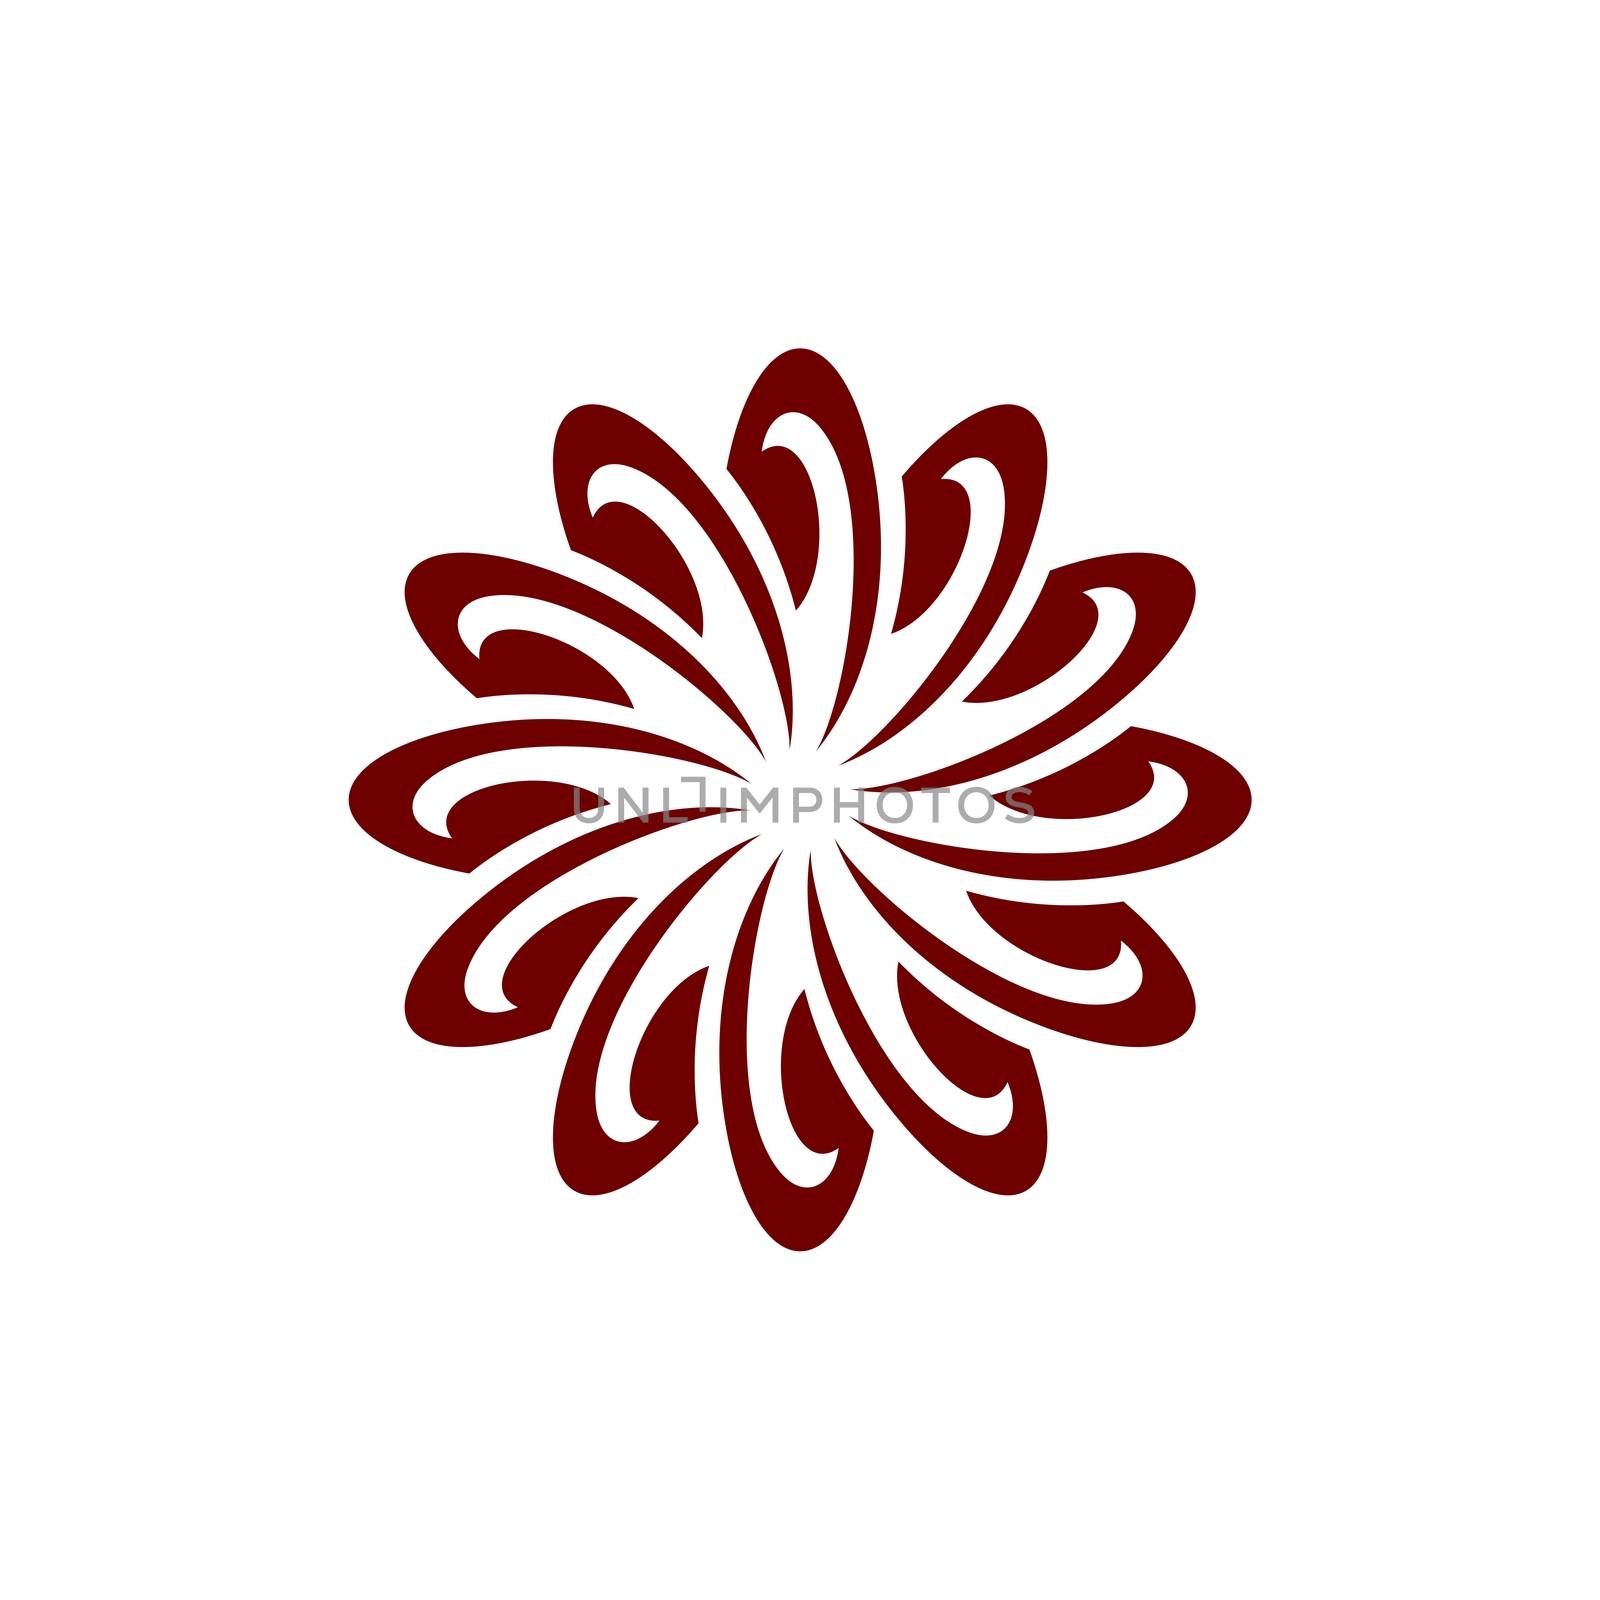 Burgundy Color Flower Pattern Ornament Logo Template. Vector EPS 10. by soponyono1